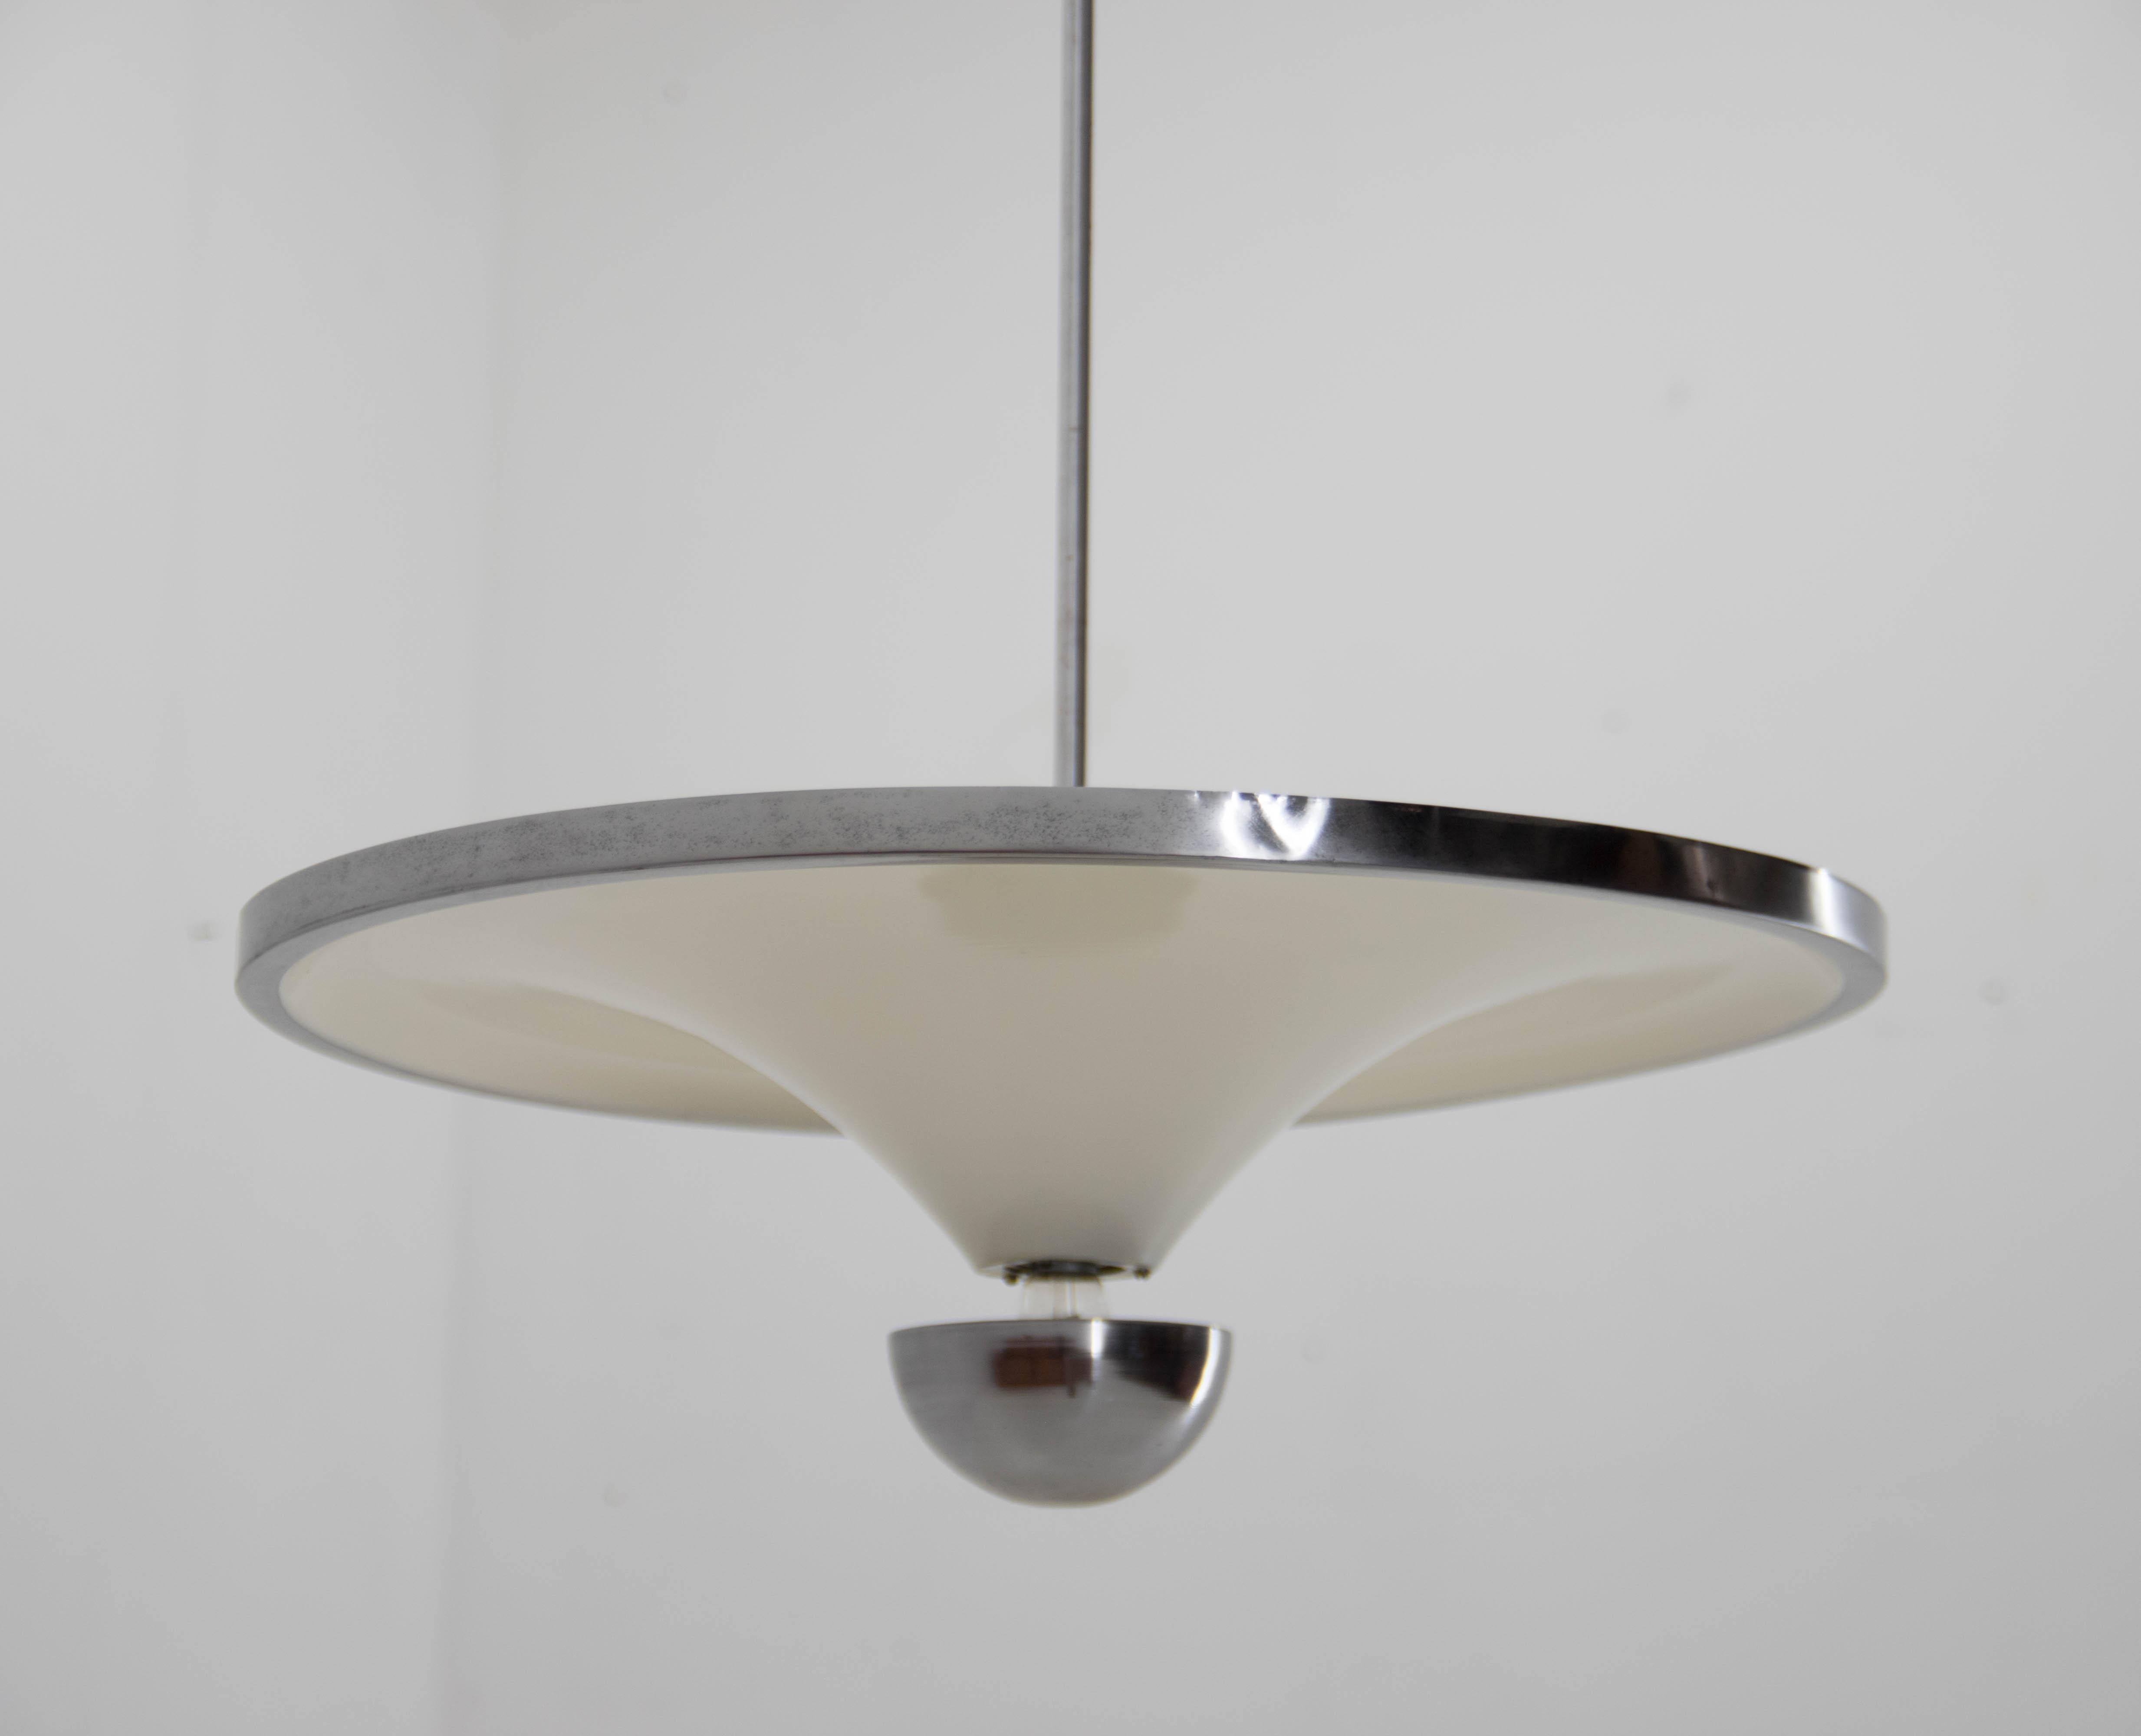 Rare Bauhaus Chandelier with Indirect Light by IAS, 1920s For Sale 3